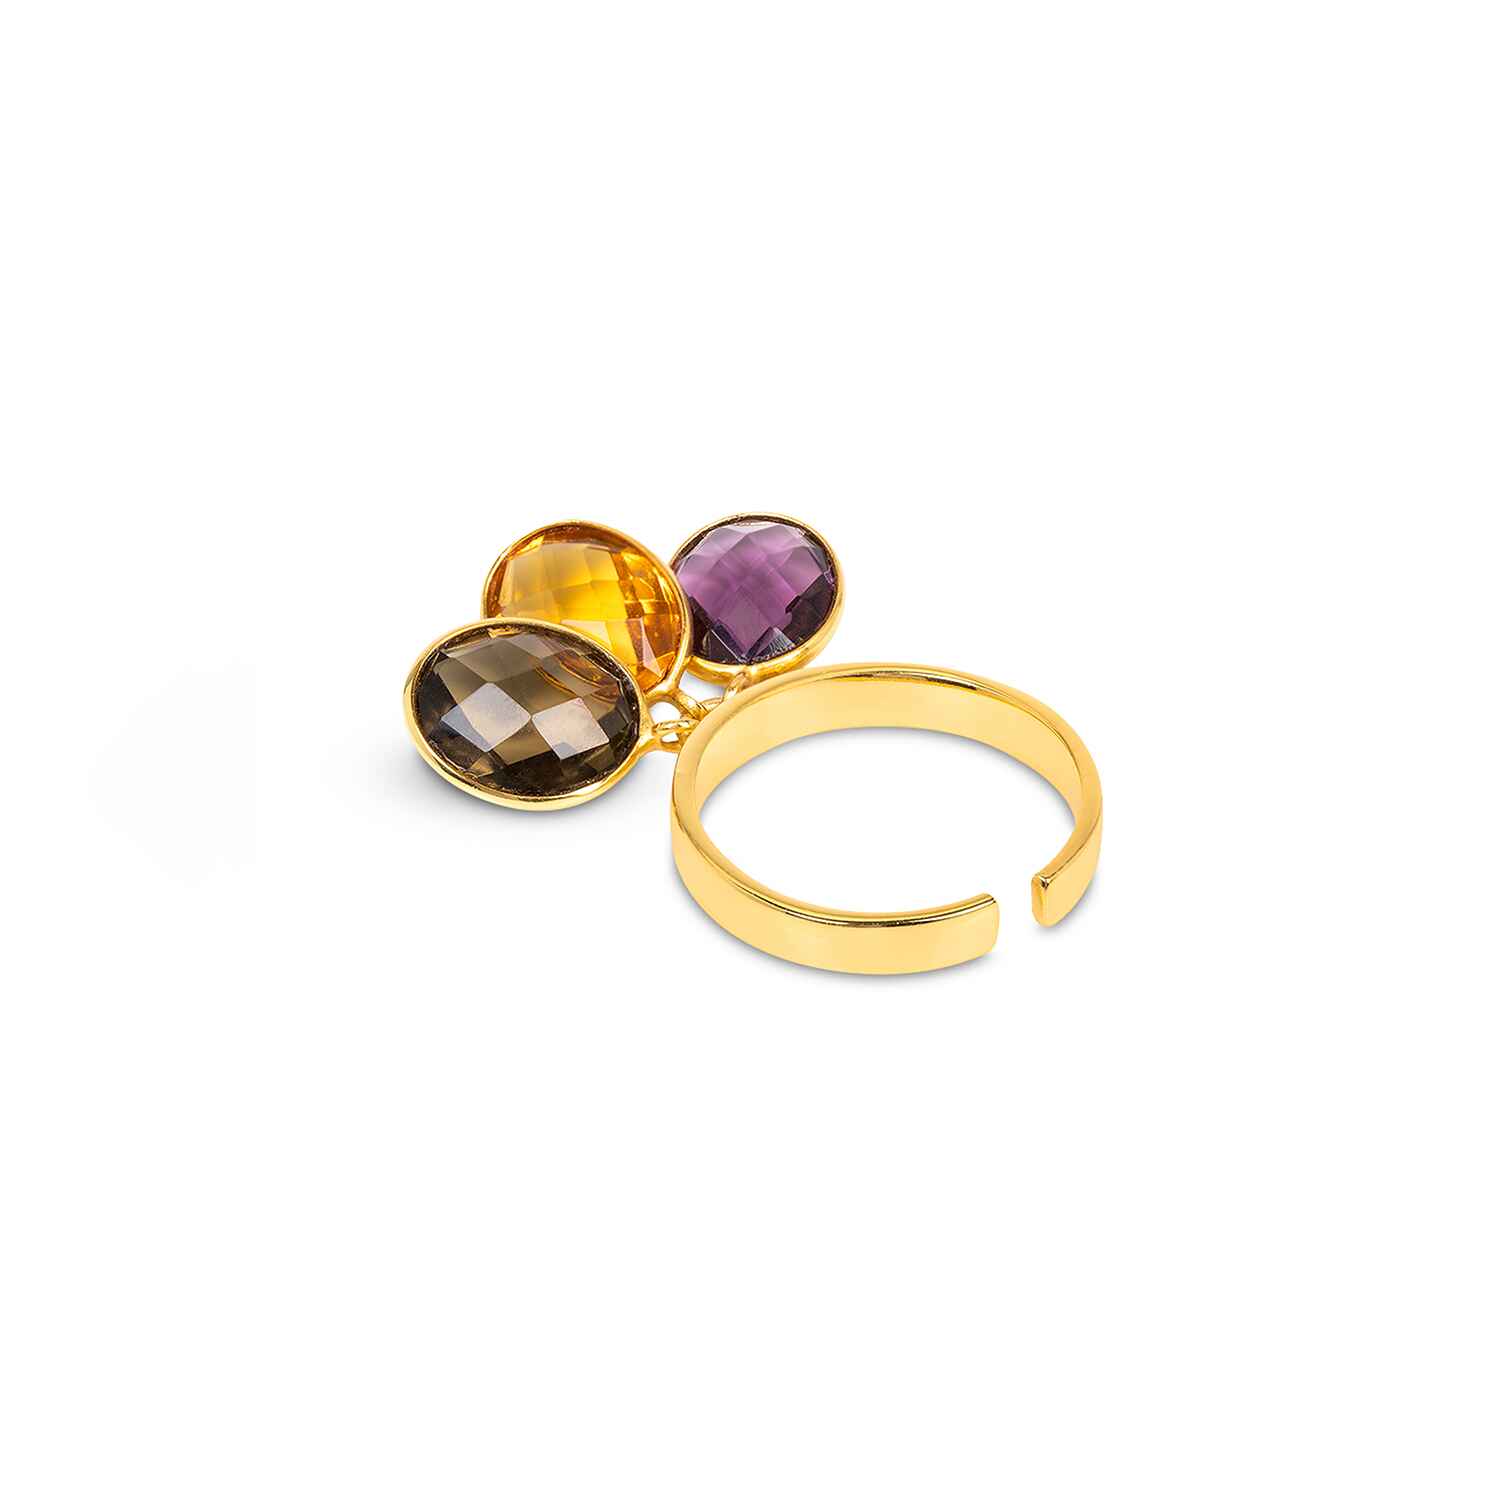 Add a little something special to your ring stack with this one. Made from recycled 18K gold vermeil, this size adjustable ring adds a statement with three gemstones: Amethyst, citrine and smokey quartz.The perfect burst of colour for any outfit.